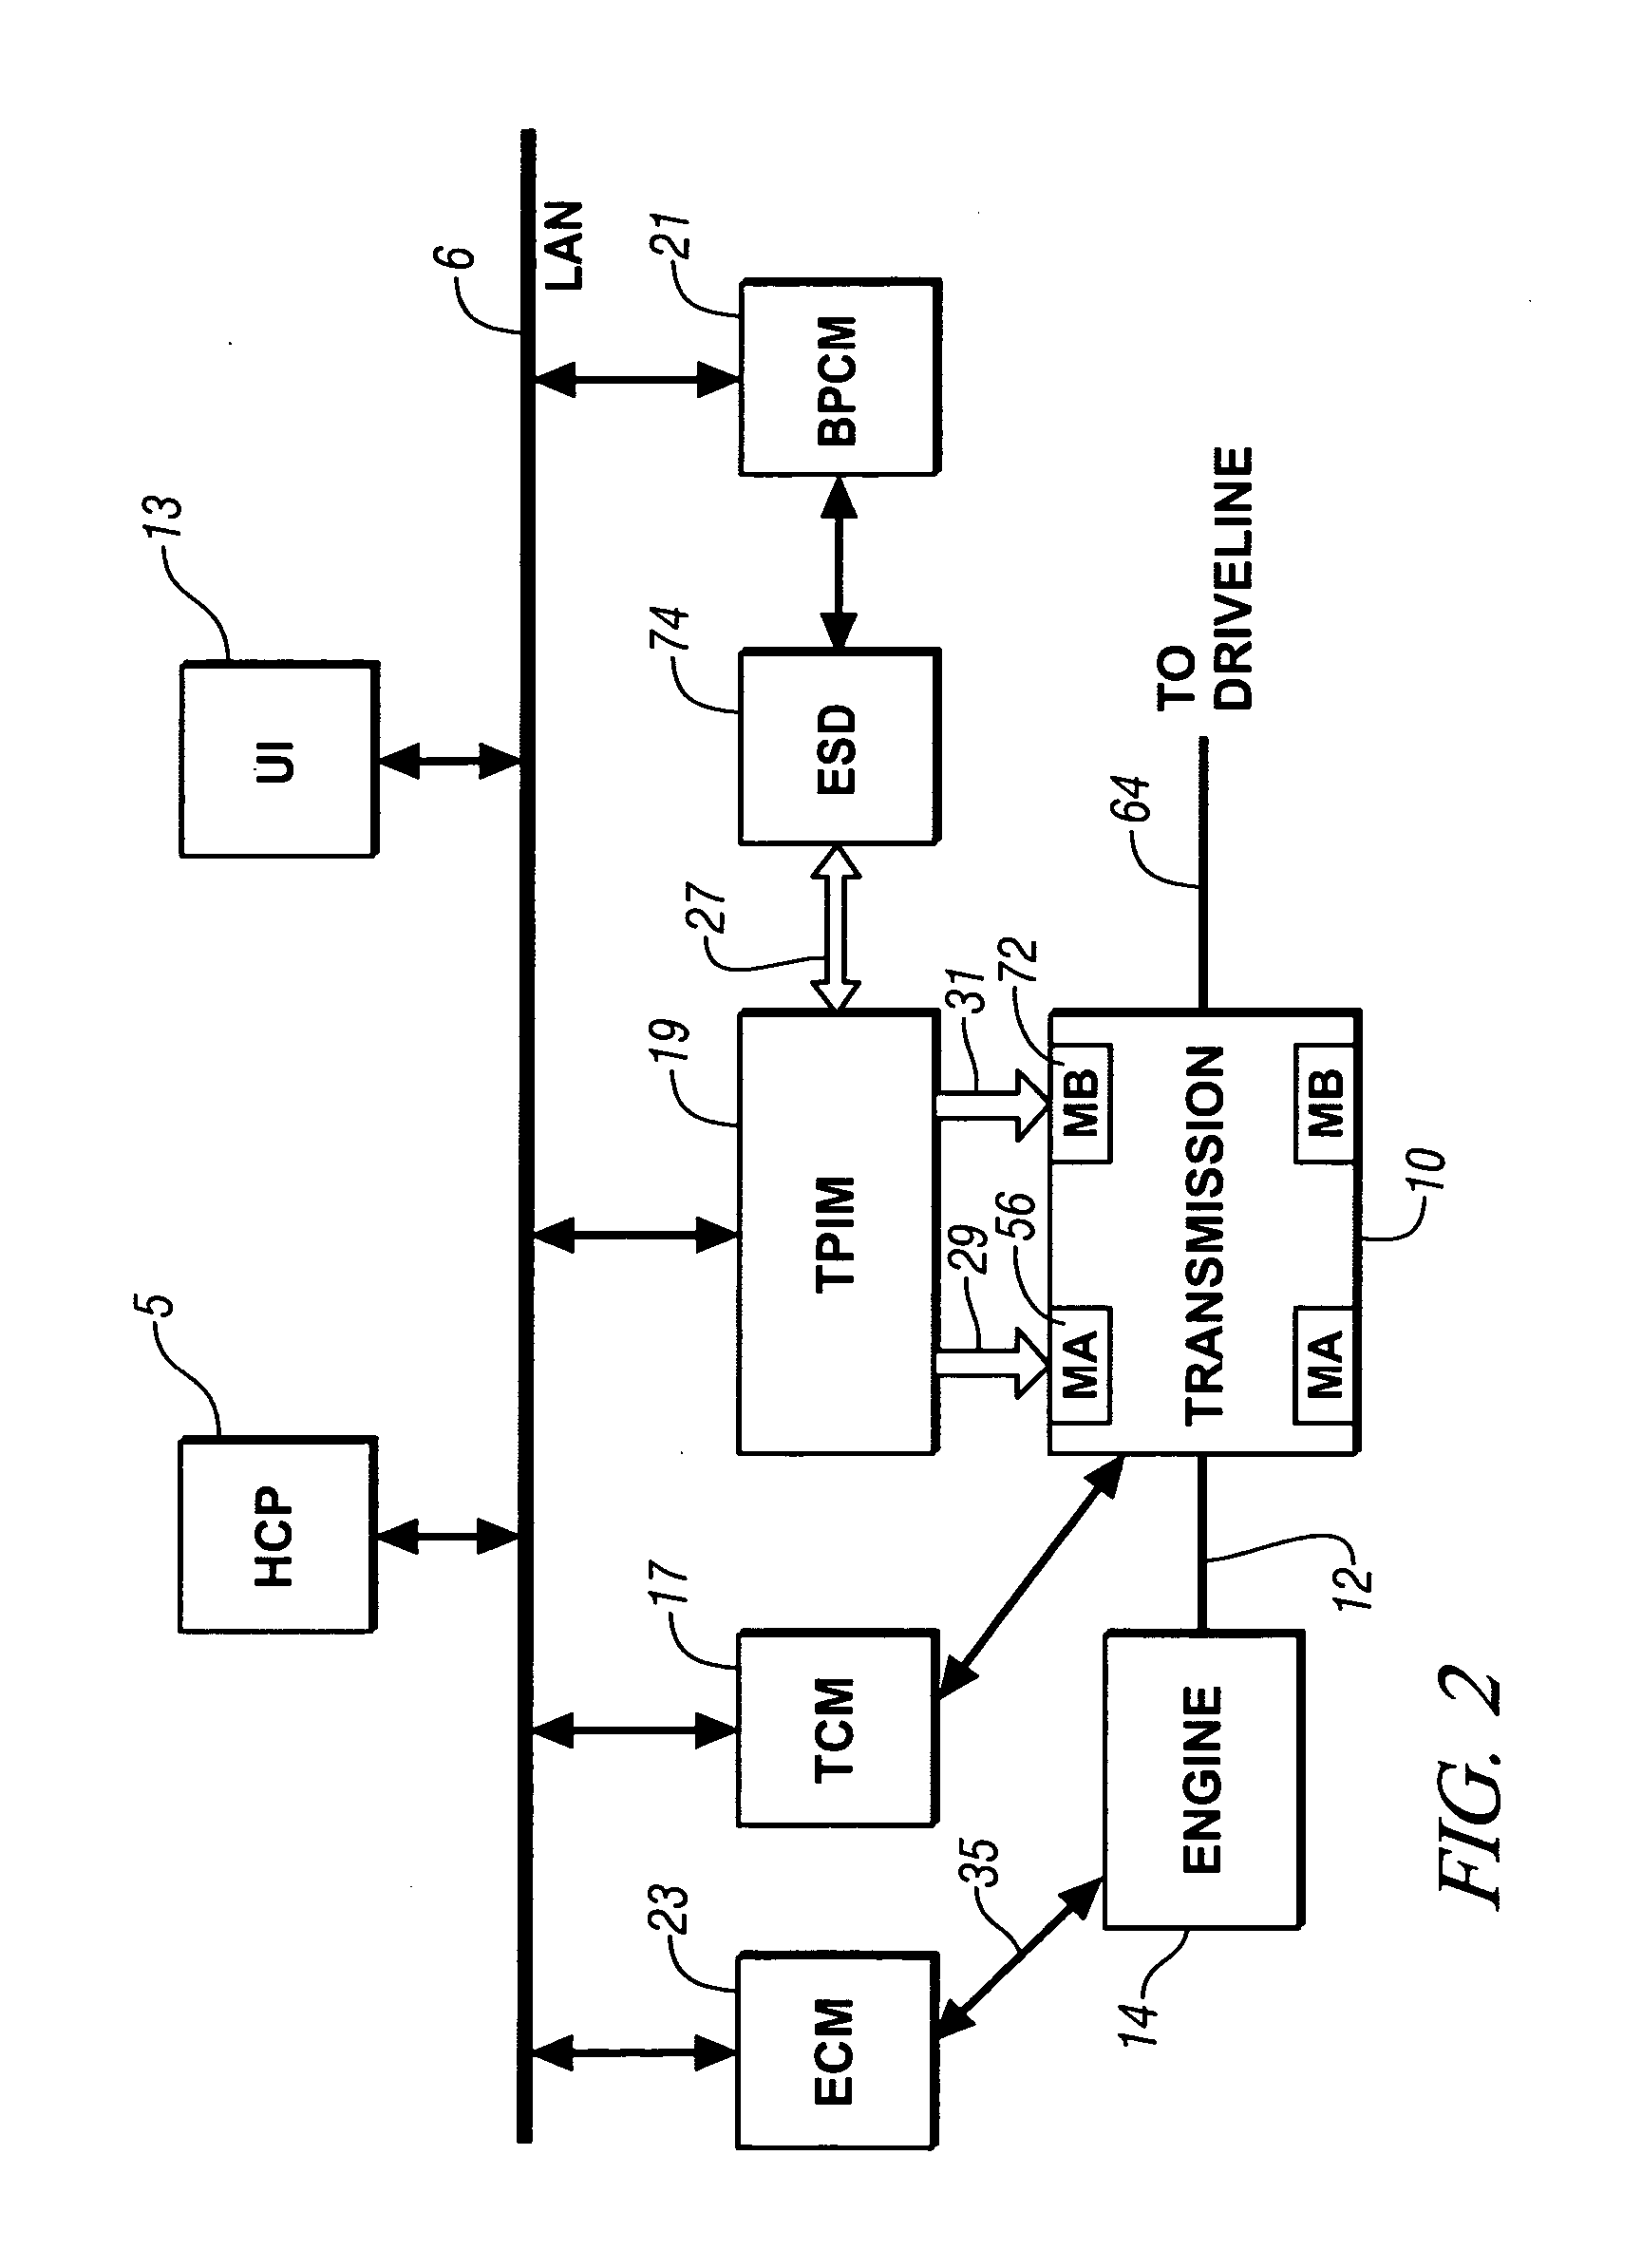 Method and apparatus for multivariate active driveline damping